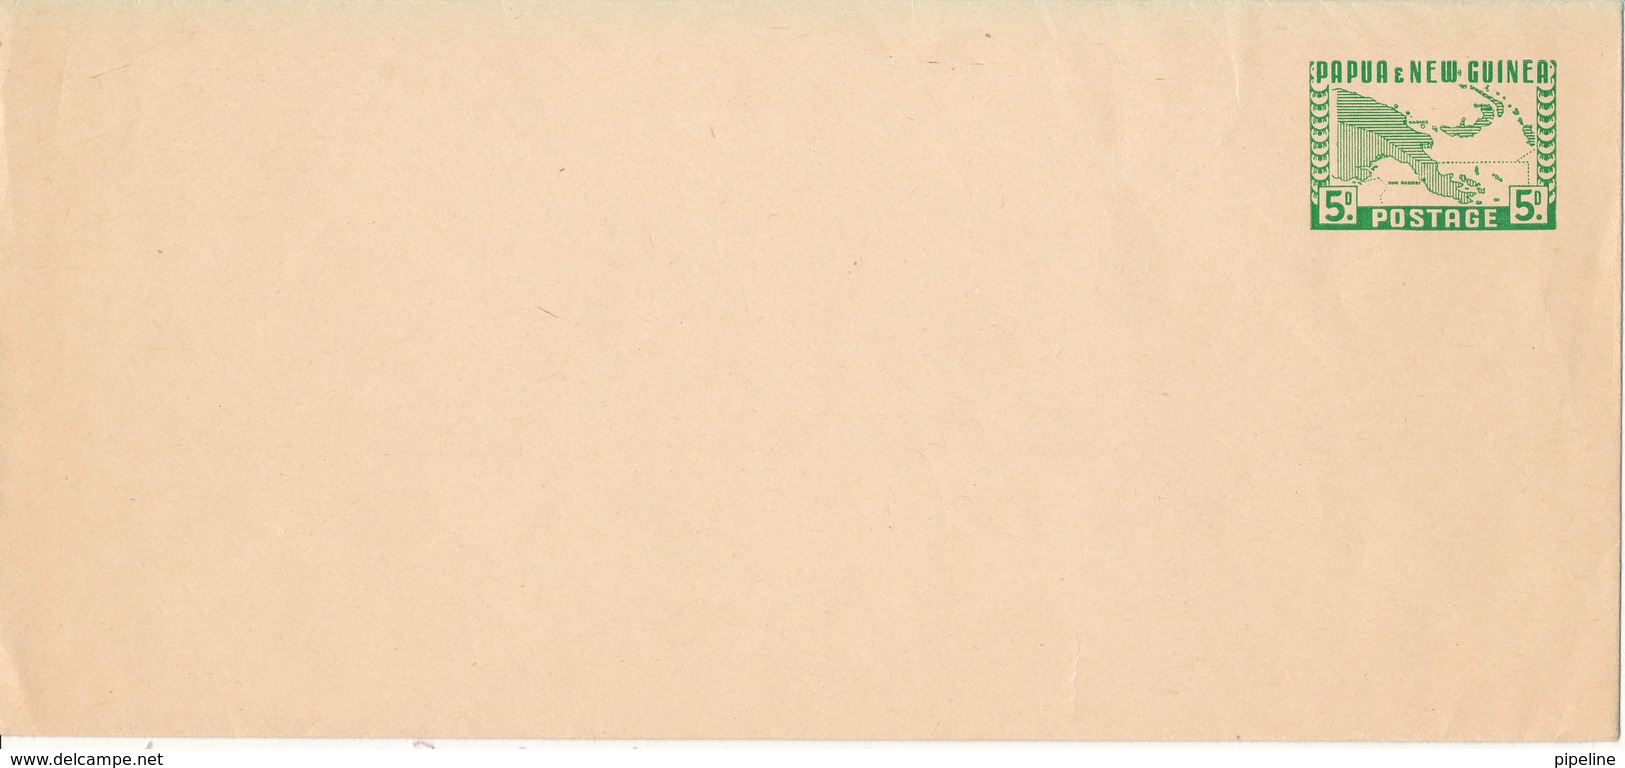 Papua New Guinea Postal Stationery Cover In Mint Condition - Papua New Guinea